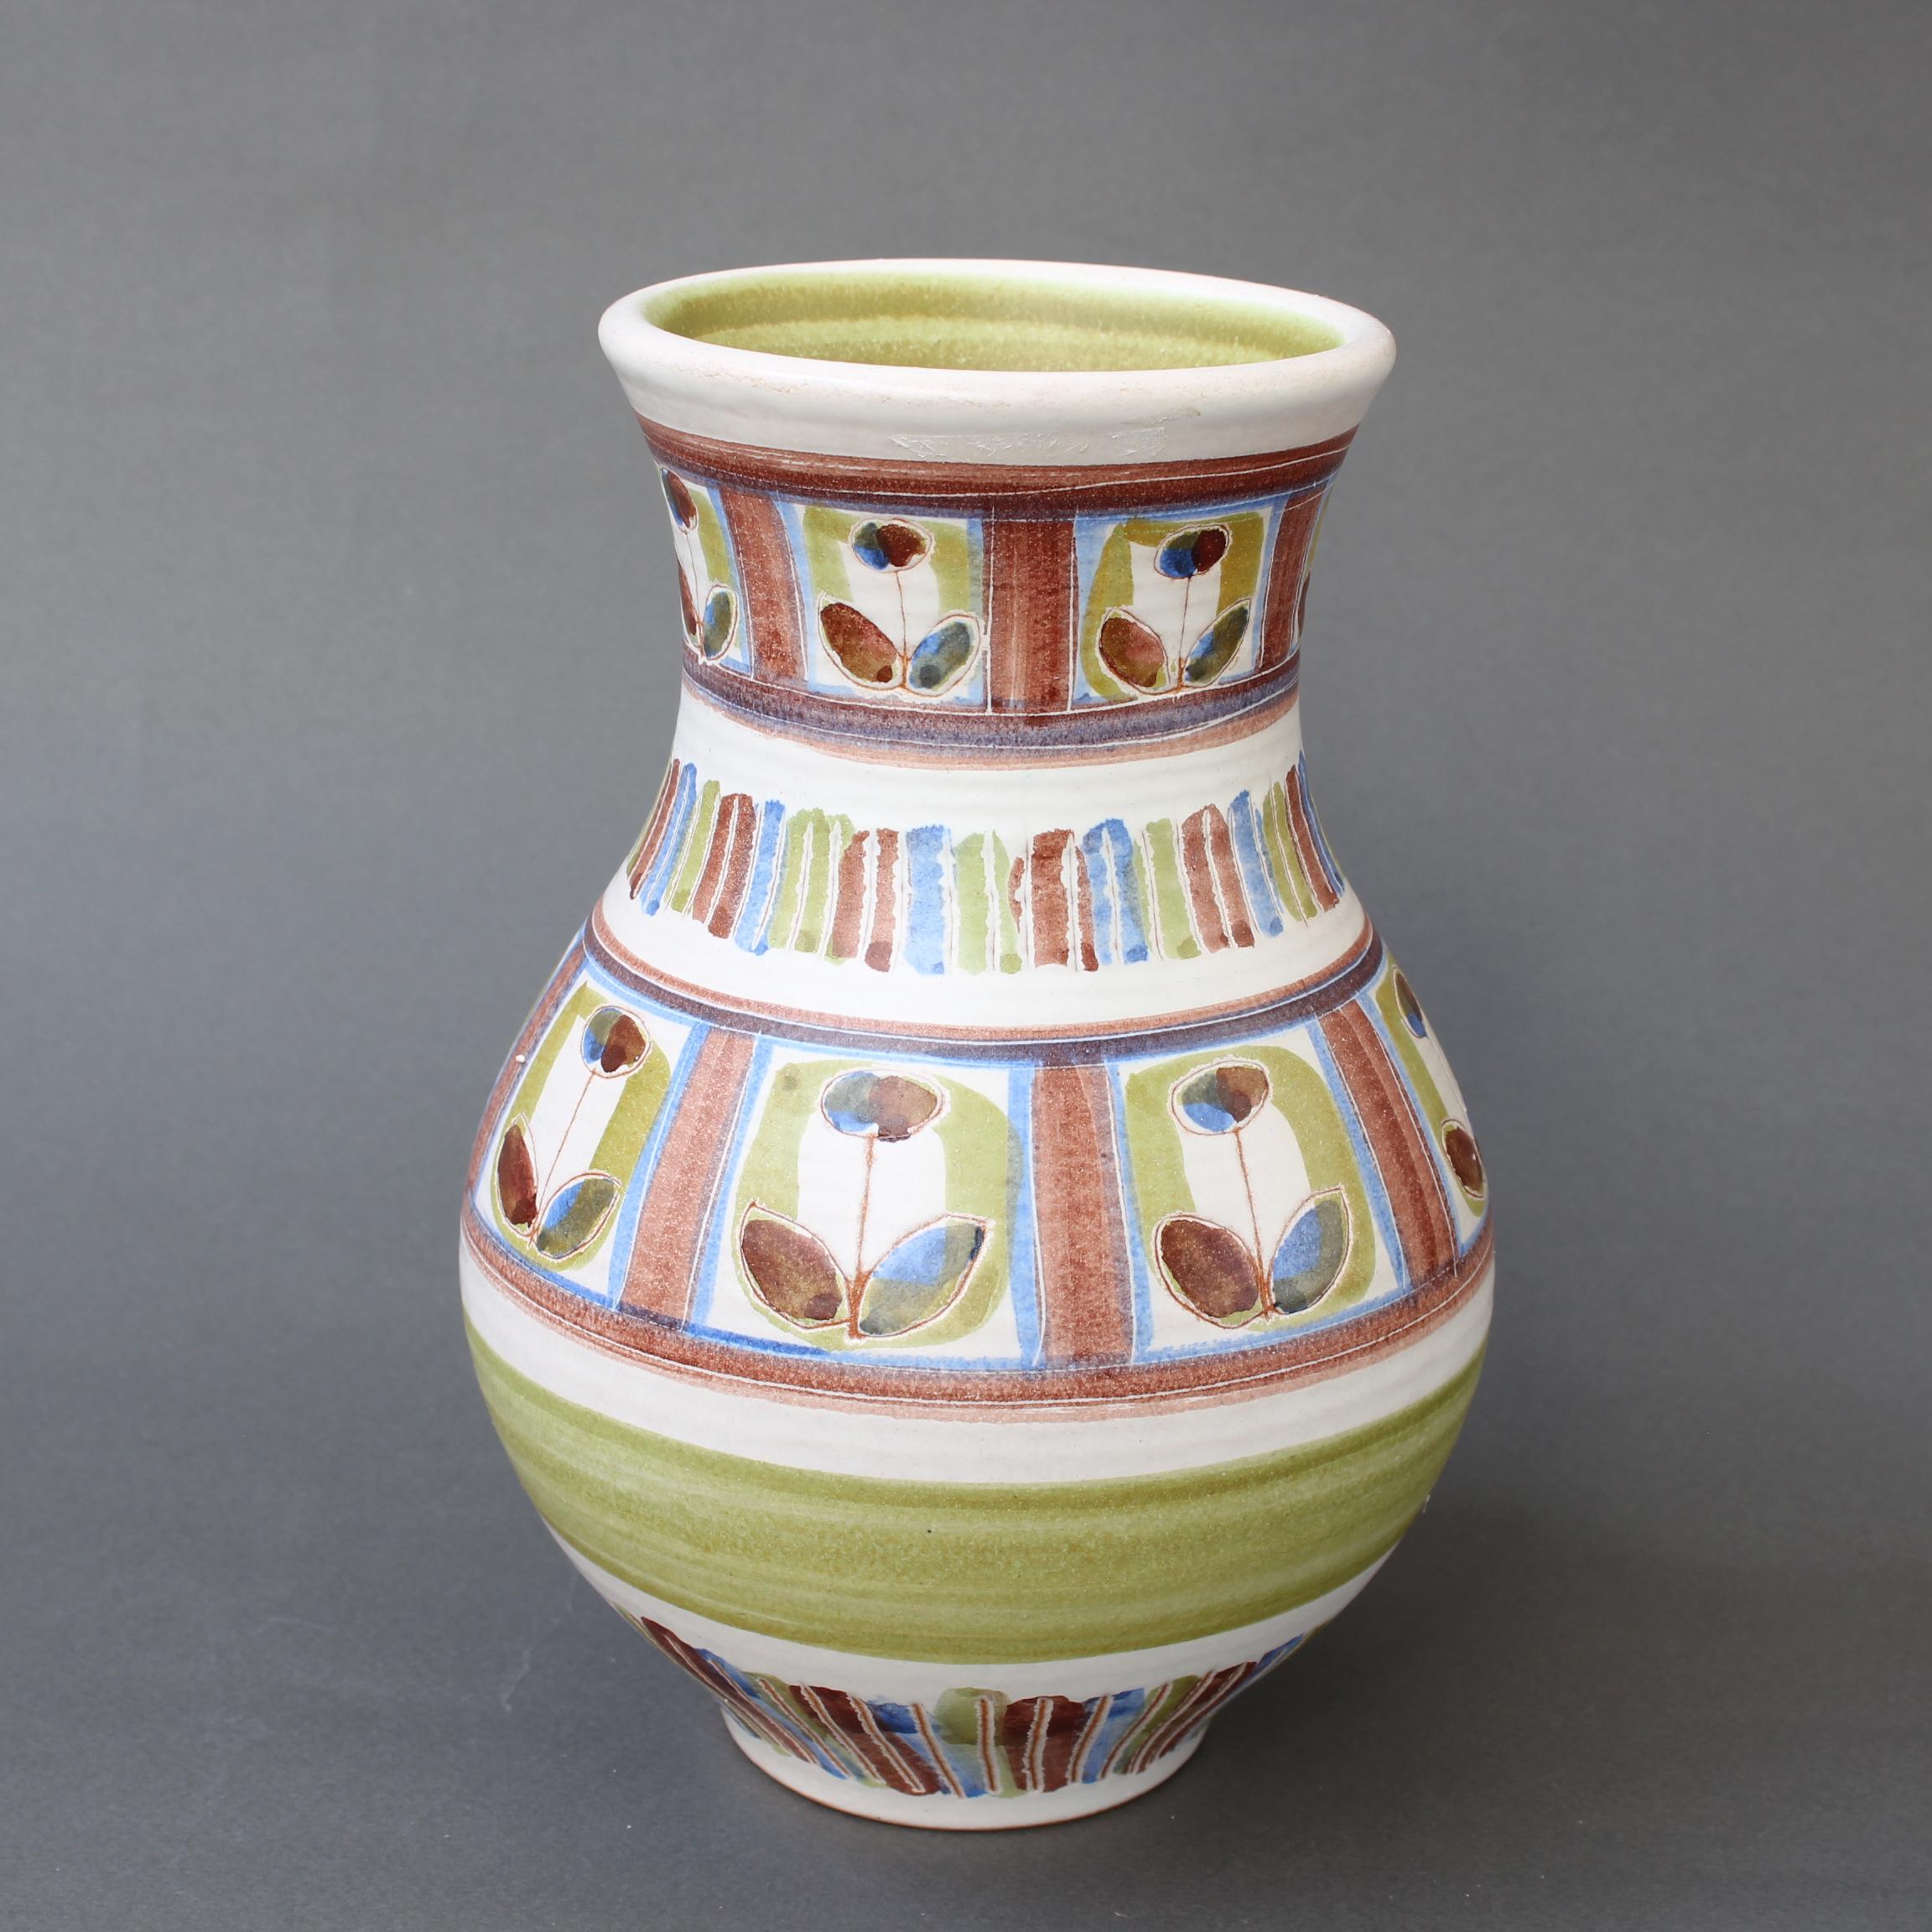 French ceramic vase by Dominique Guillot (circa 1960s). Delightfully decorated with a colourful flower motif, the vase is utilitarian and beautiful all at once. The sensuous, spherical body narrows at the neck and opens wide again at the mouth